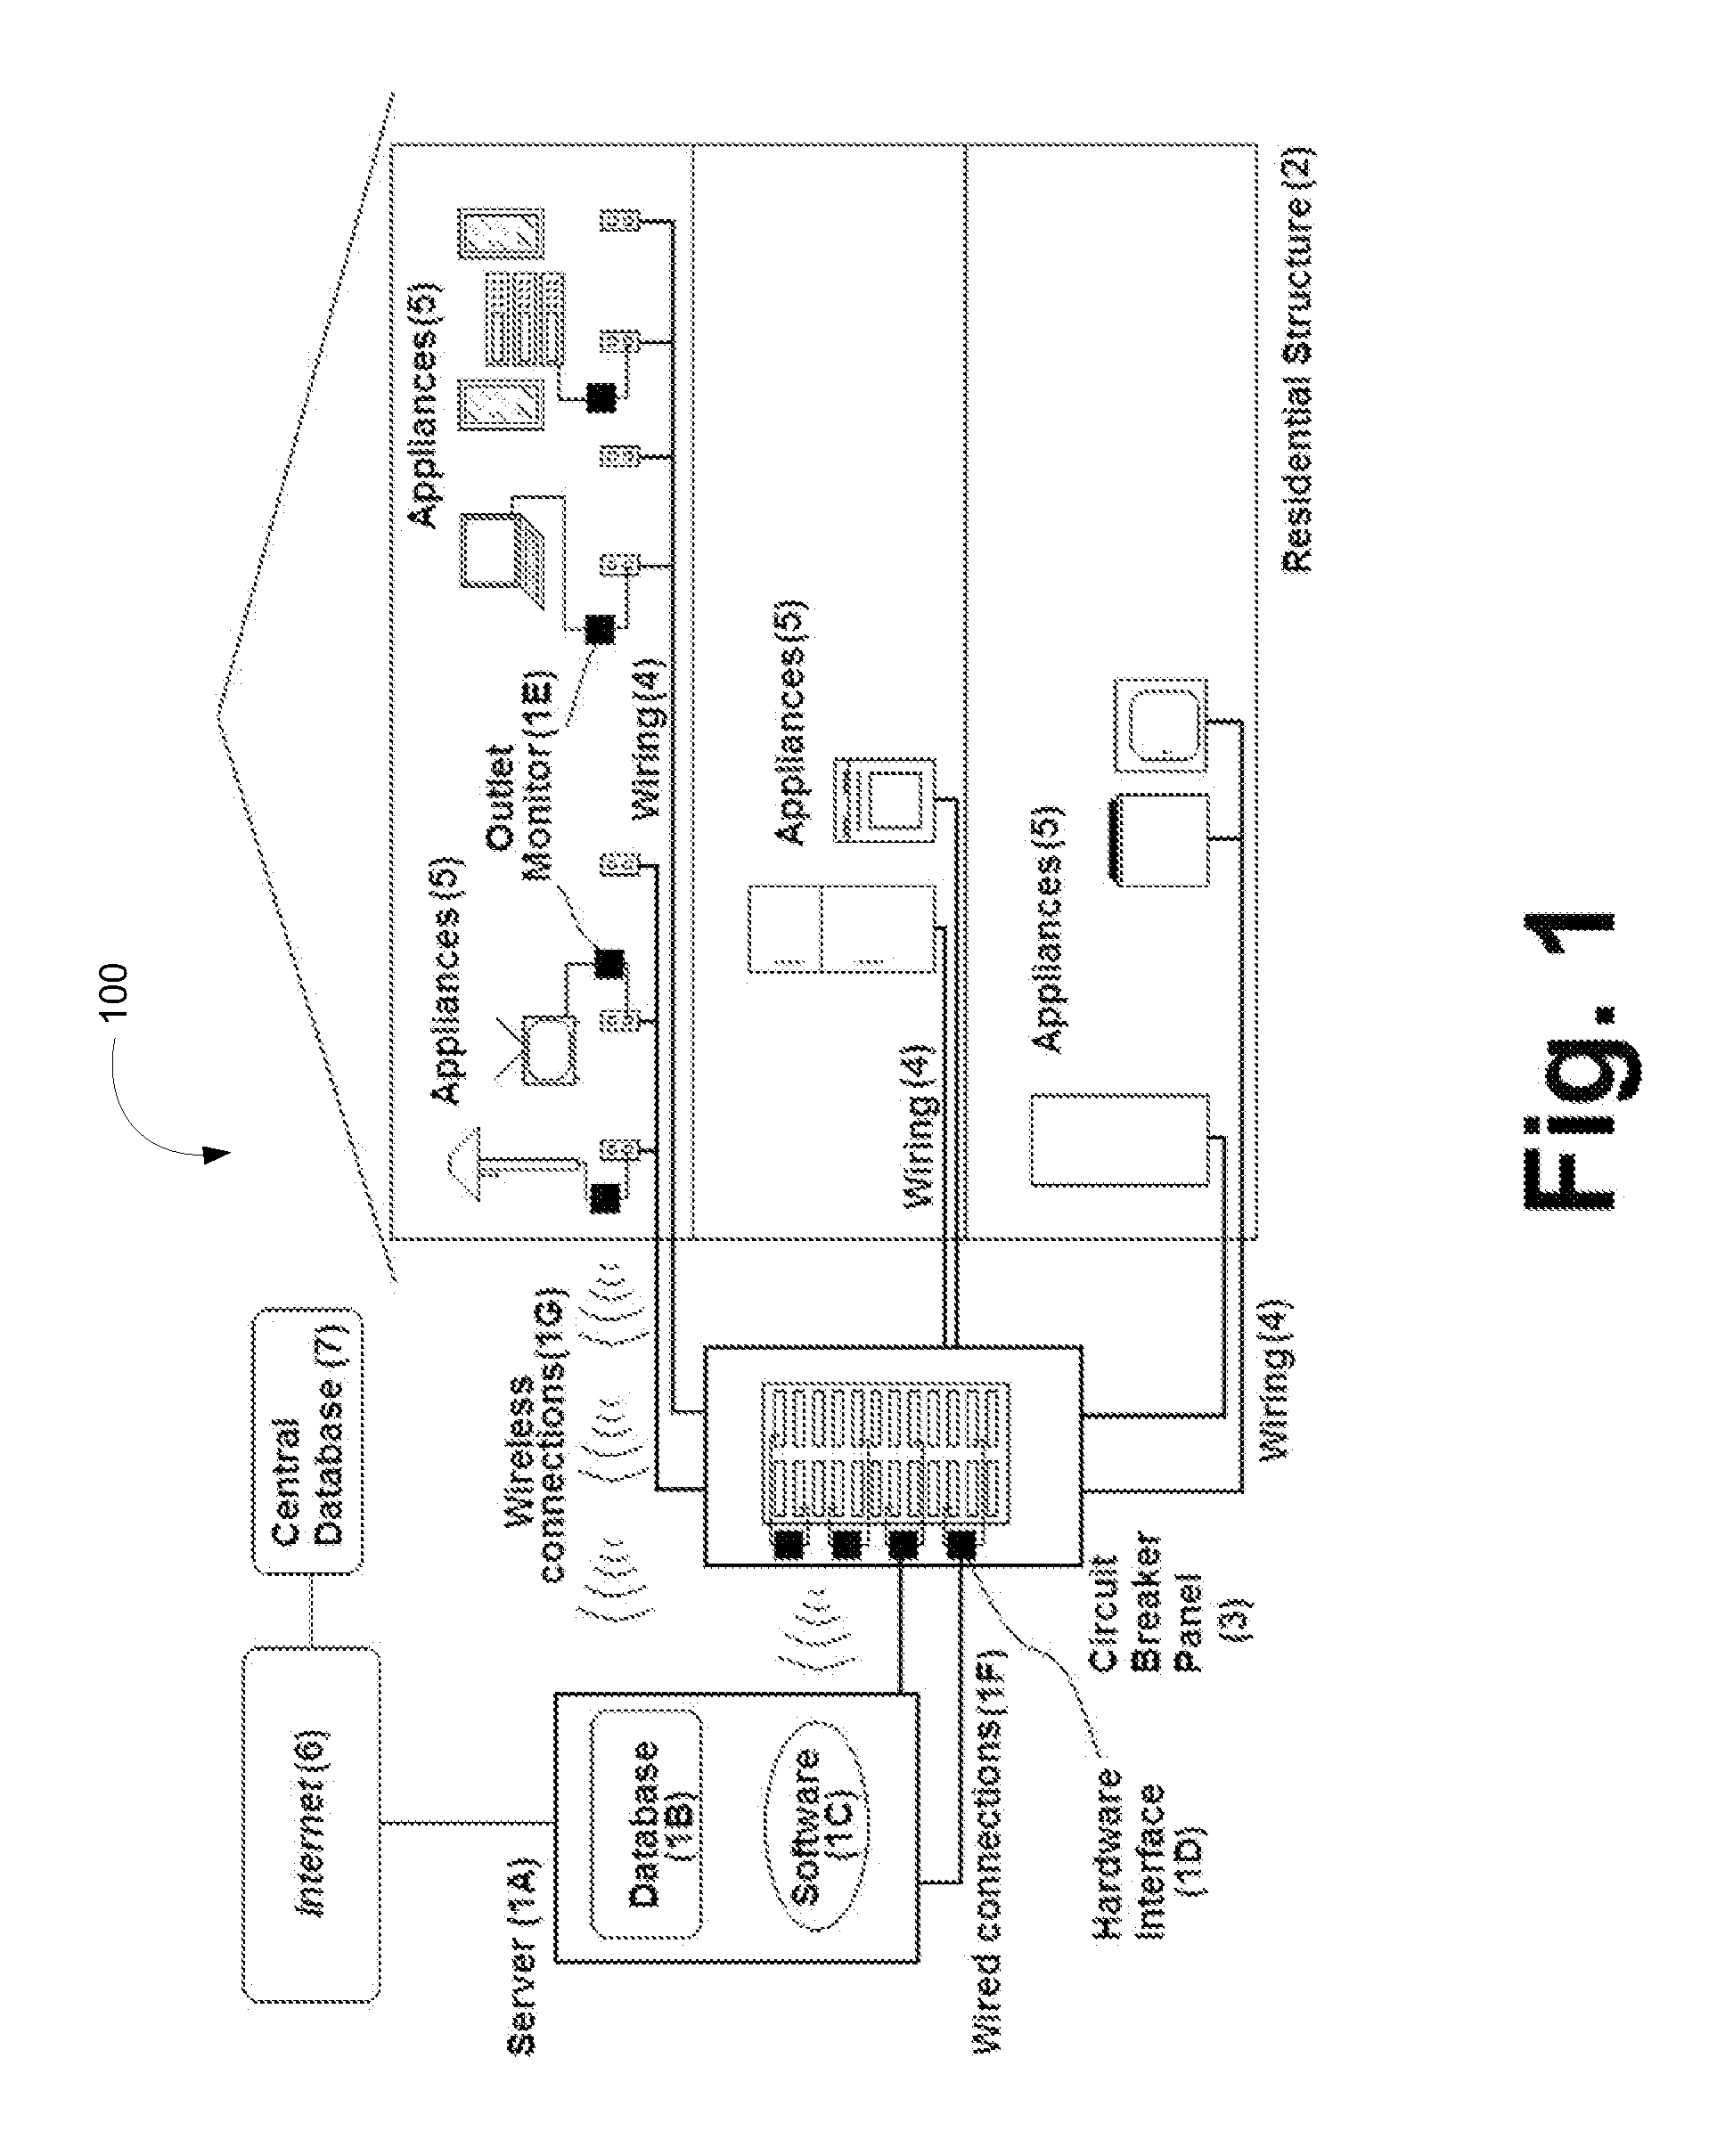 System and method to monitor and manage performance of appliances